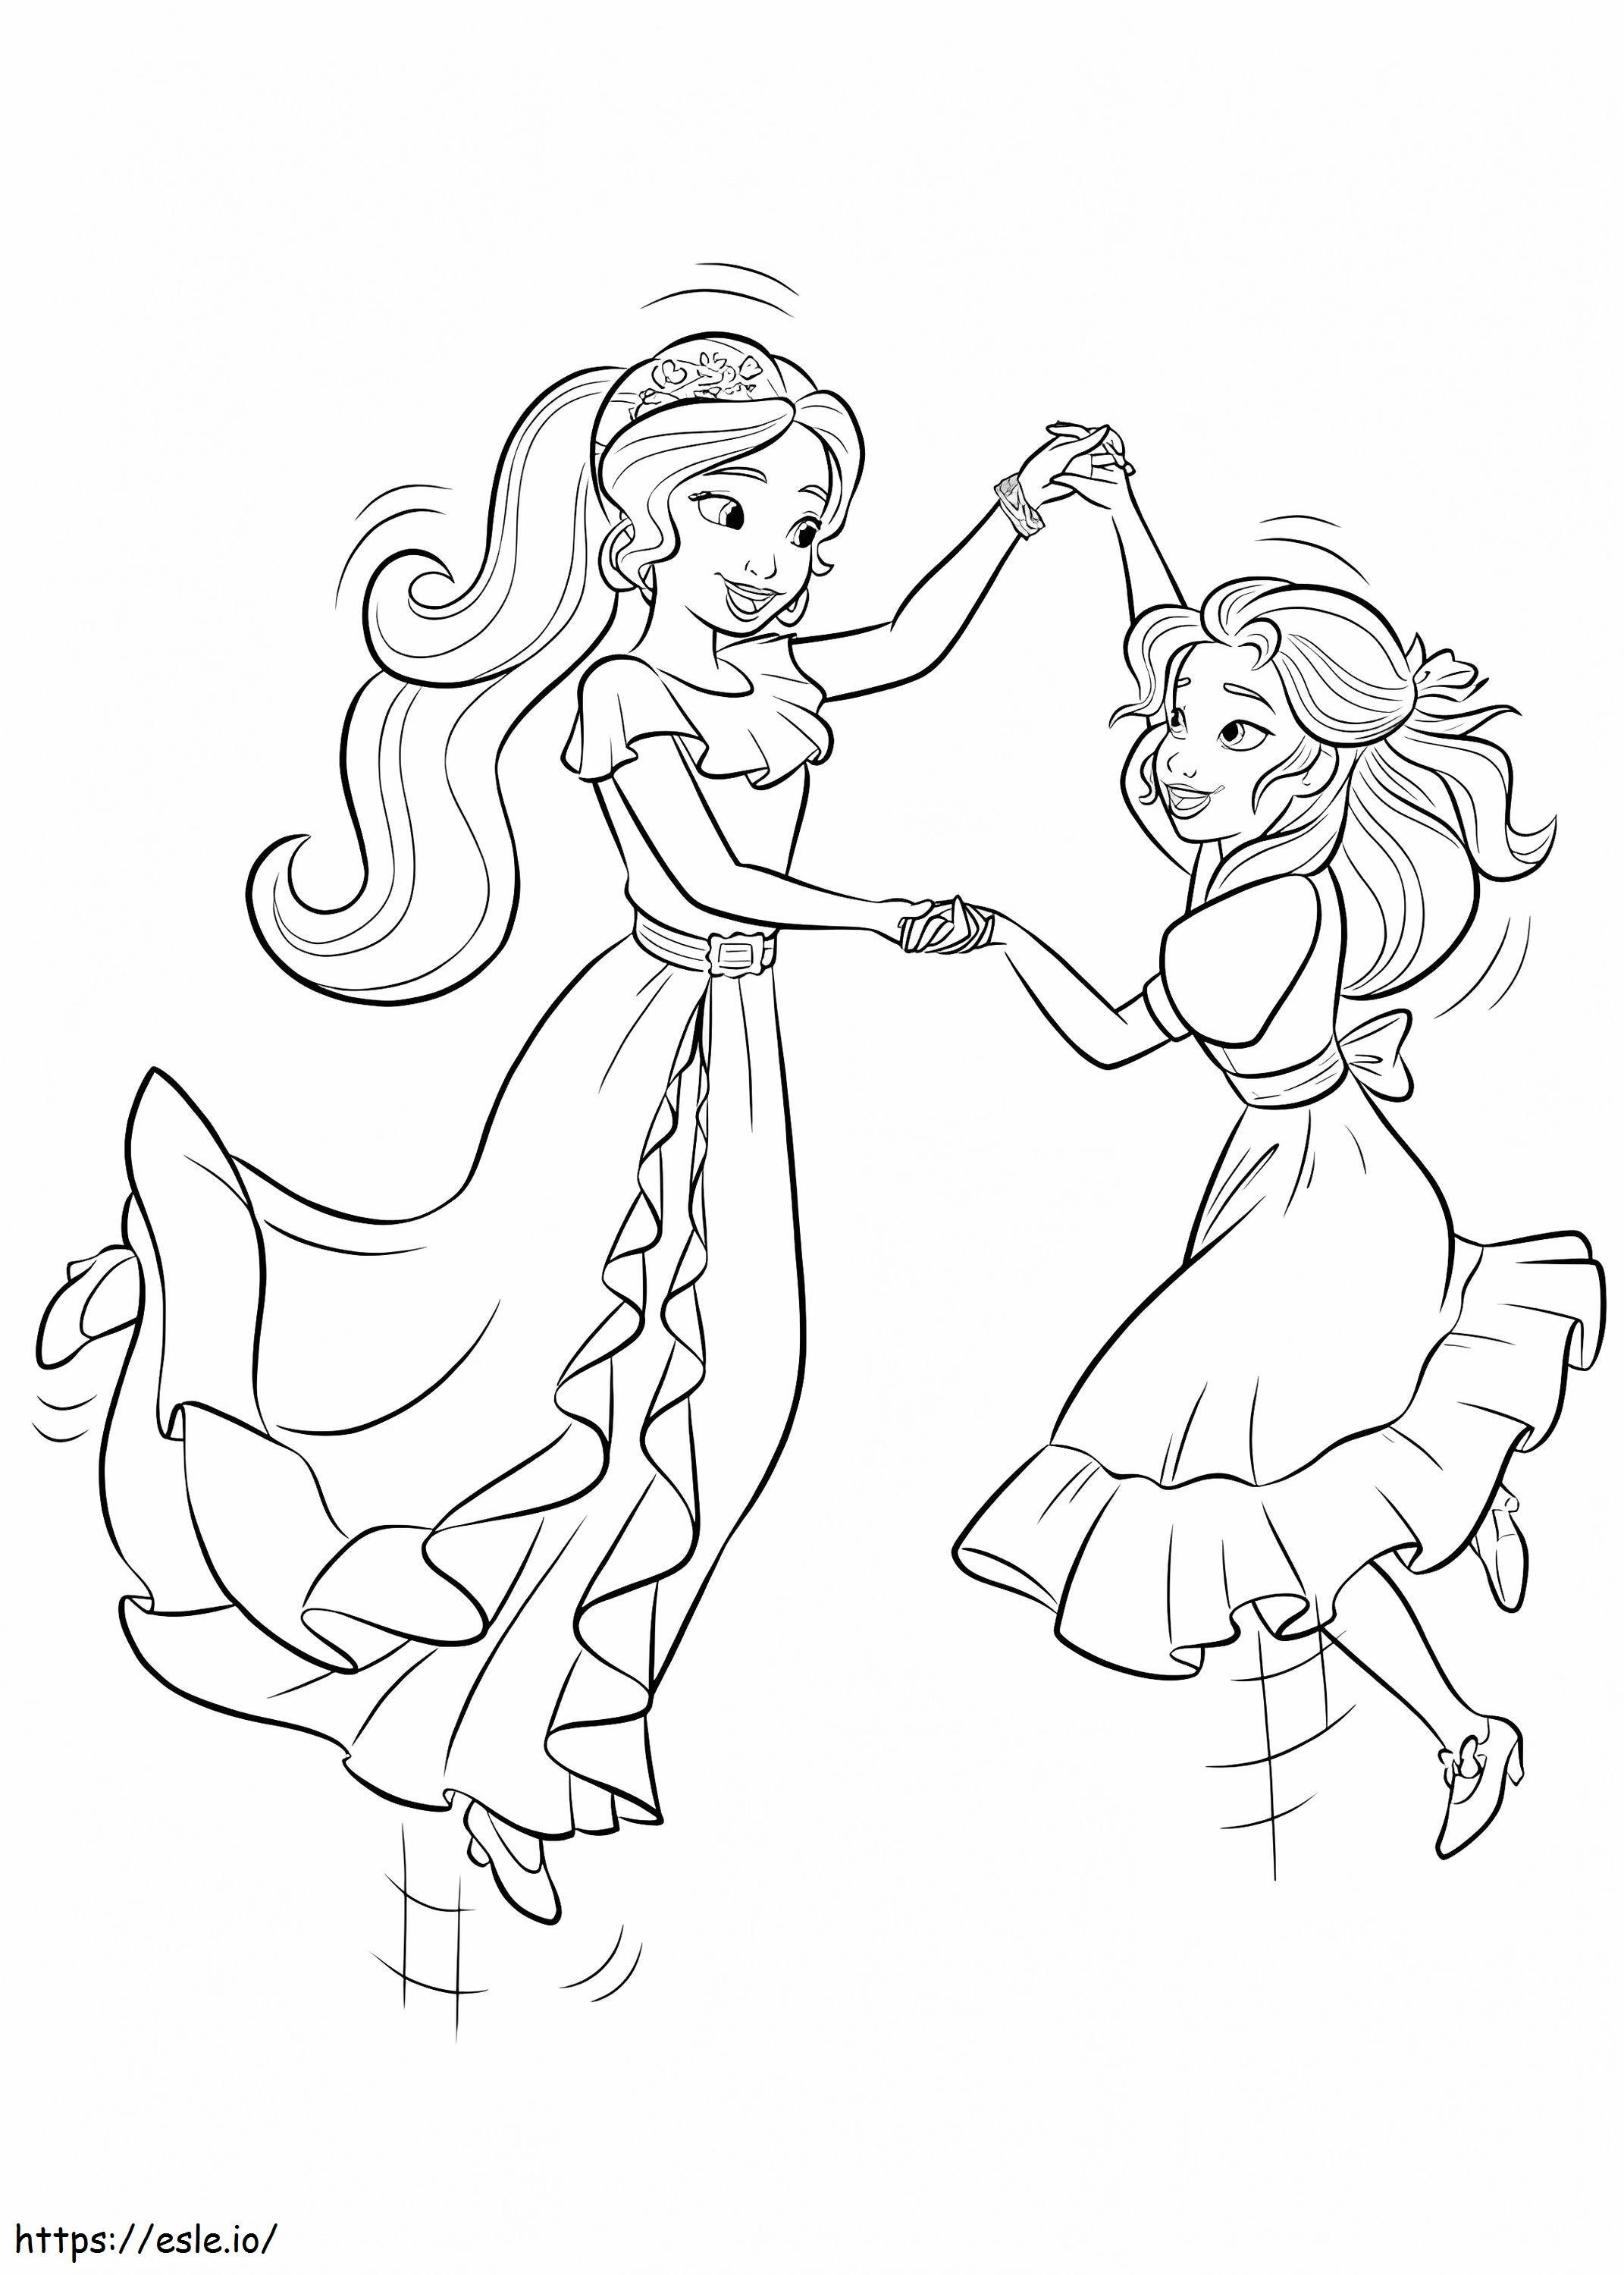 1535075122 Elena Isabel Dancing A4 coloring page